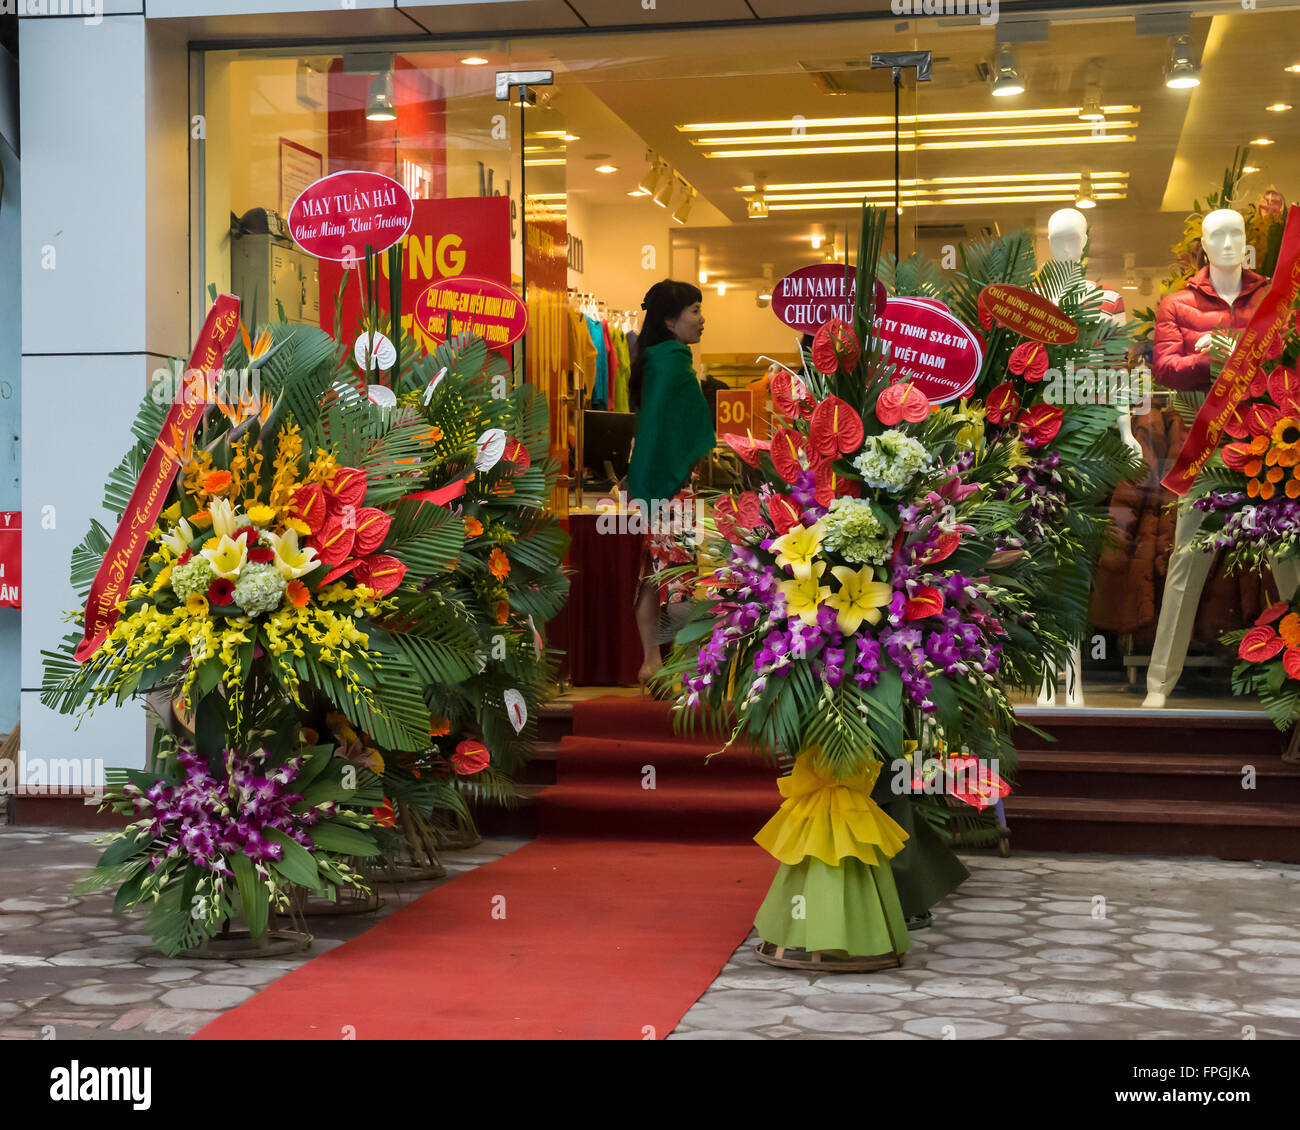 SAIGON, VIETNAM - JANUARY 21, 2016: A shop preparing for Tet, the Vietnamese New Year which takes place on February 8th which is Stock Photo